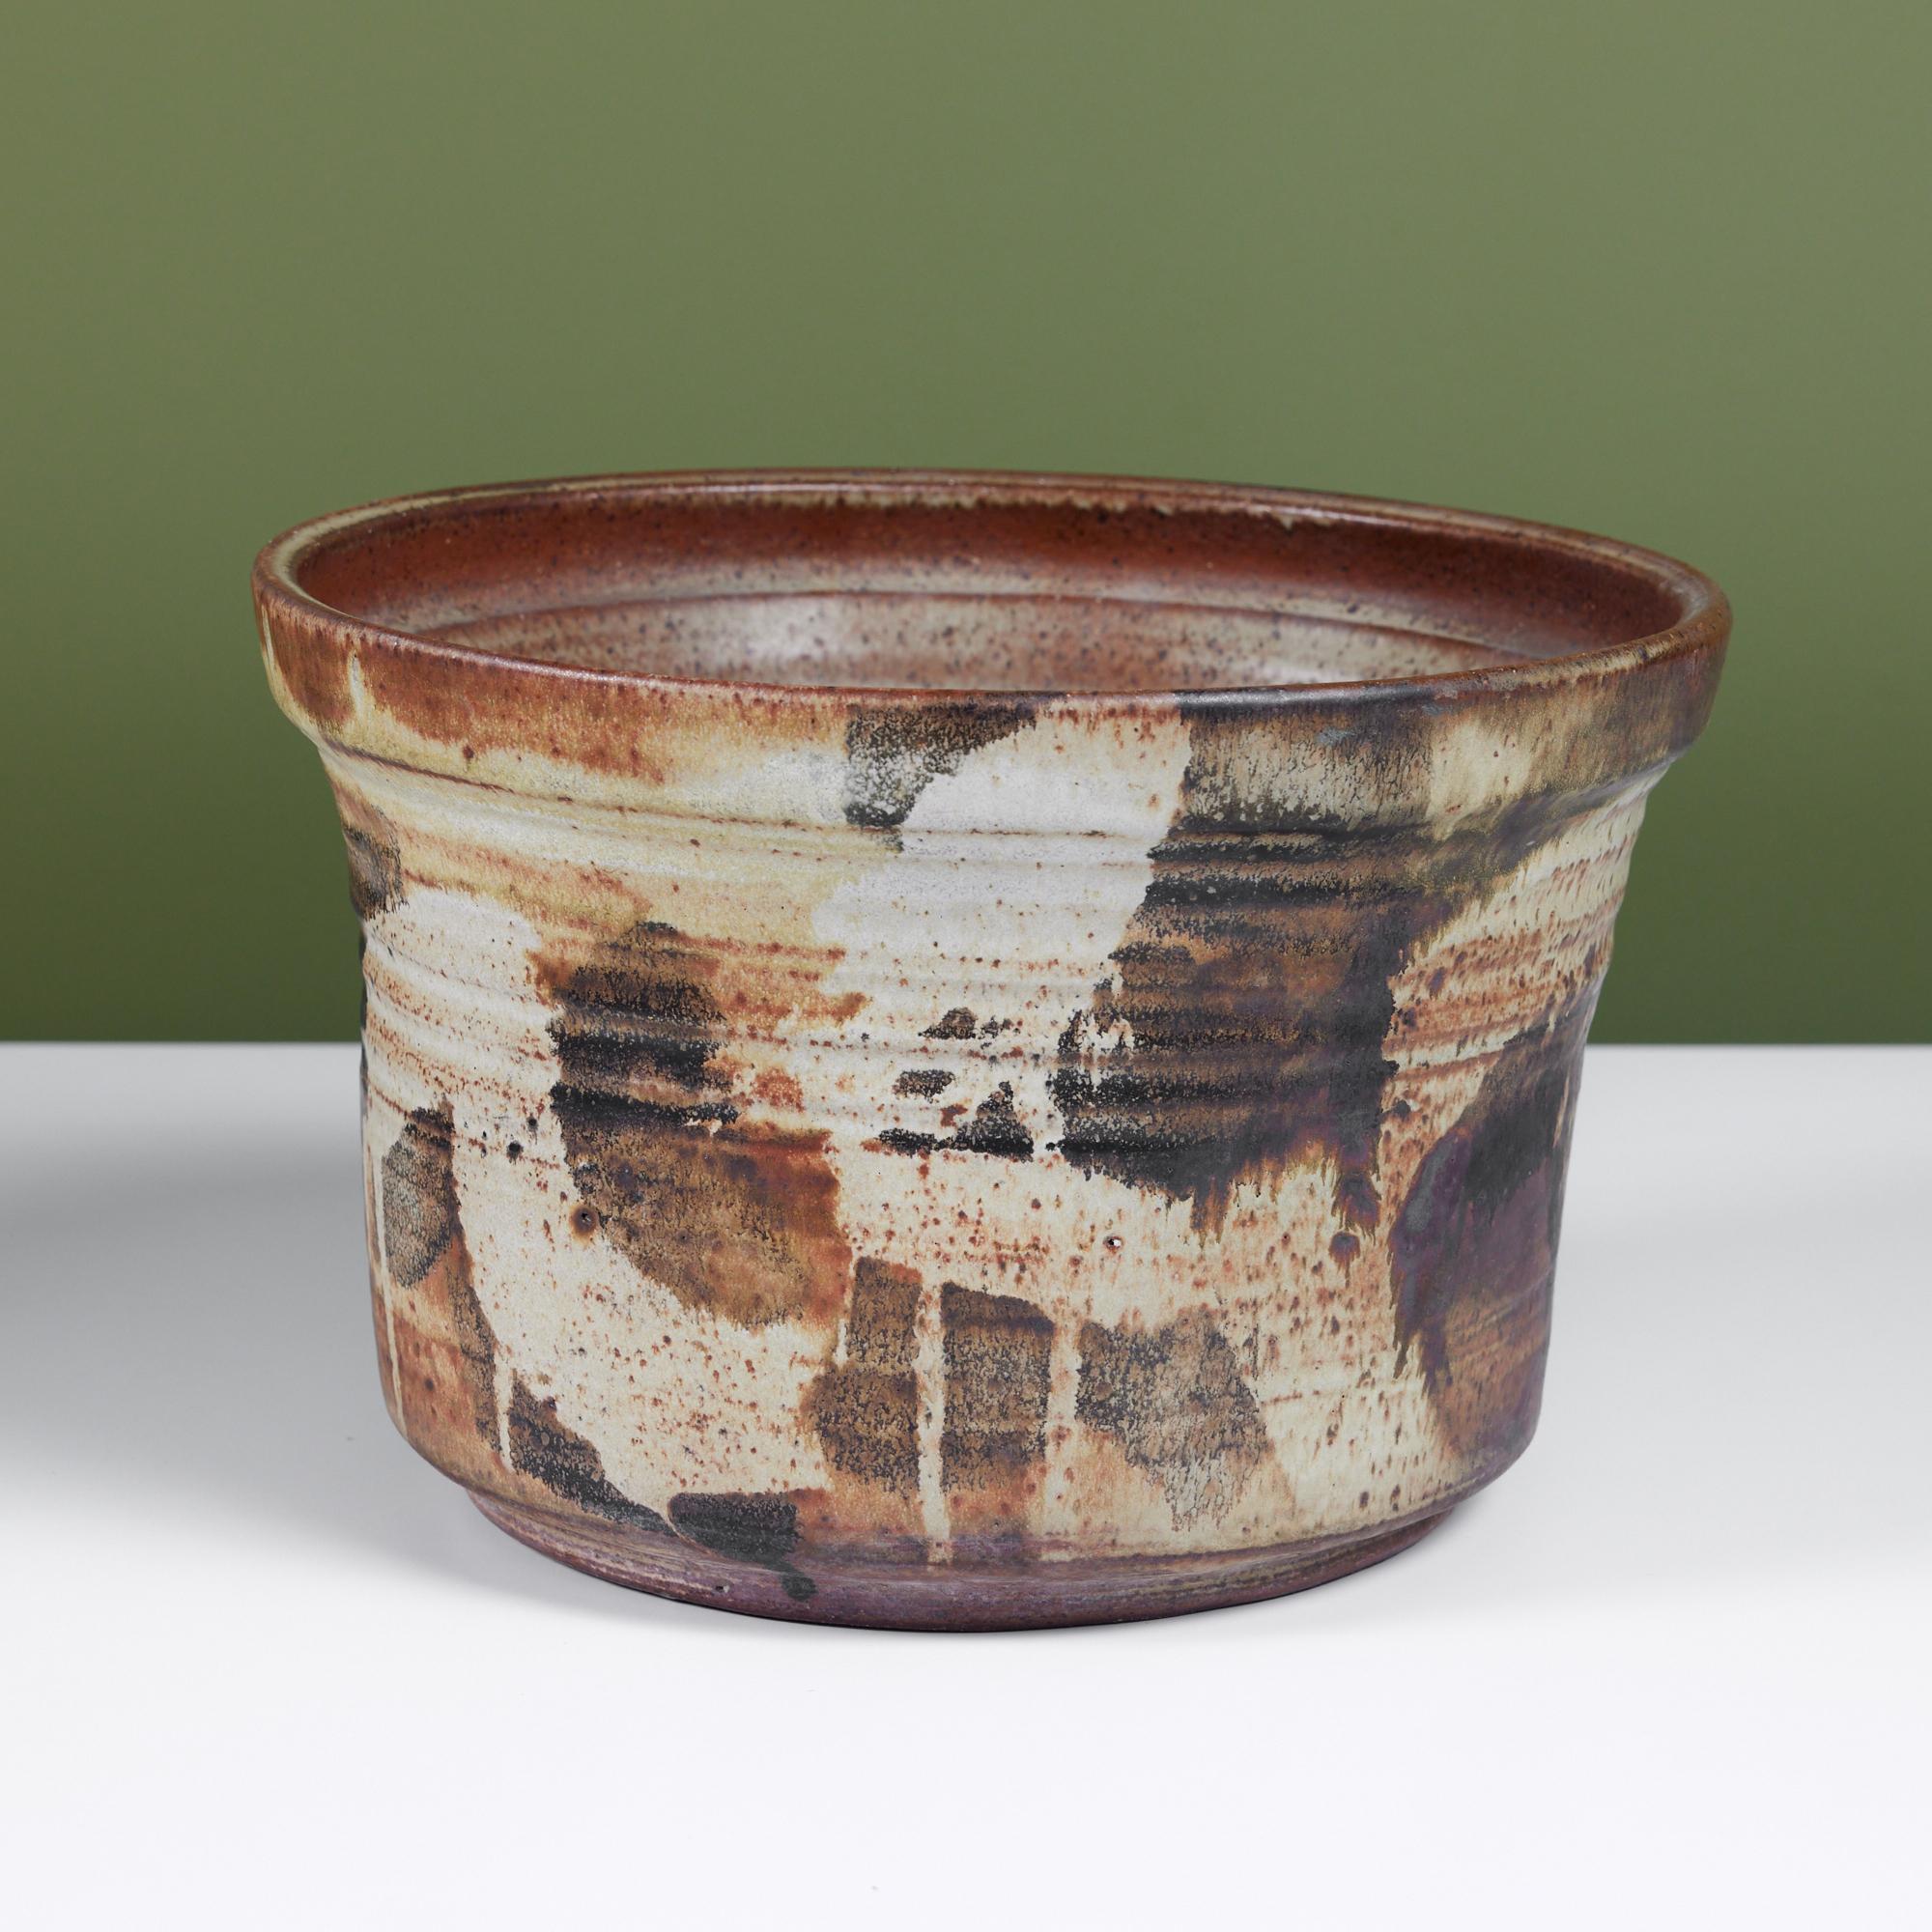 Hand thrown stoneware planter by American ceramicist, Kazuko Matthews. This planter features a layered brush stroke glaze in brown, cream and olive tones. Signed by the artist.

Dimensions
12